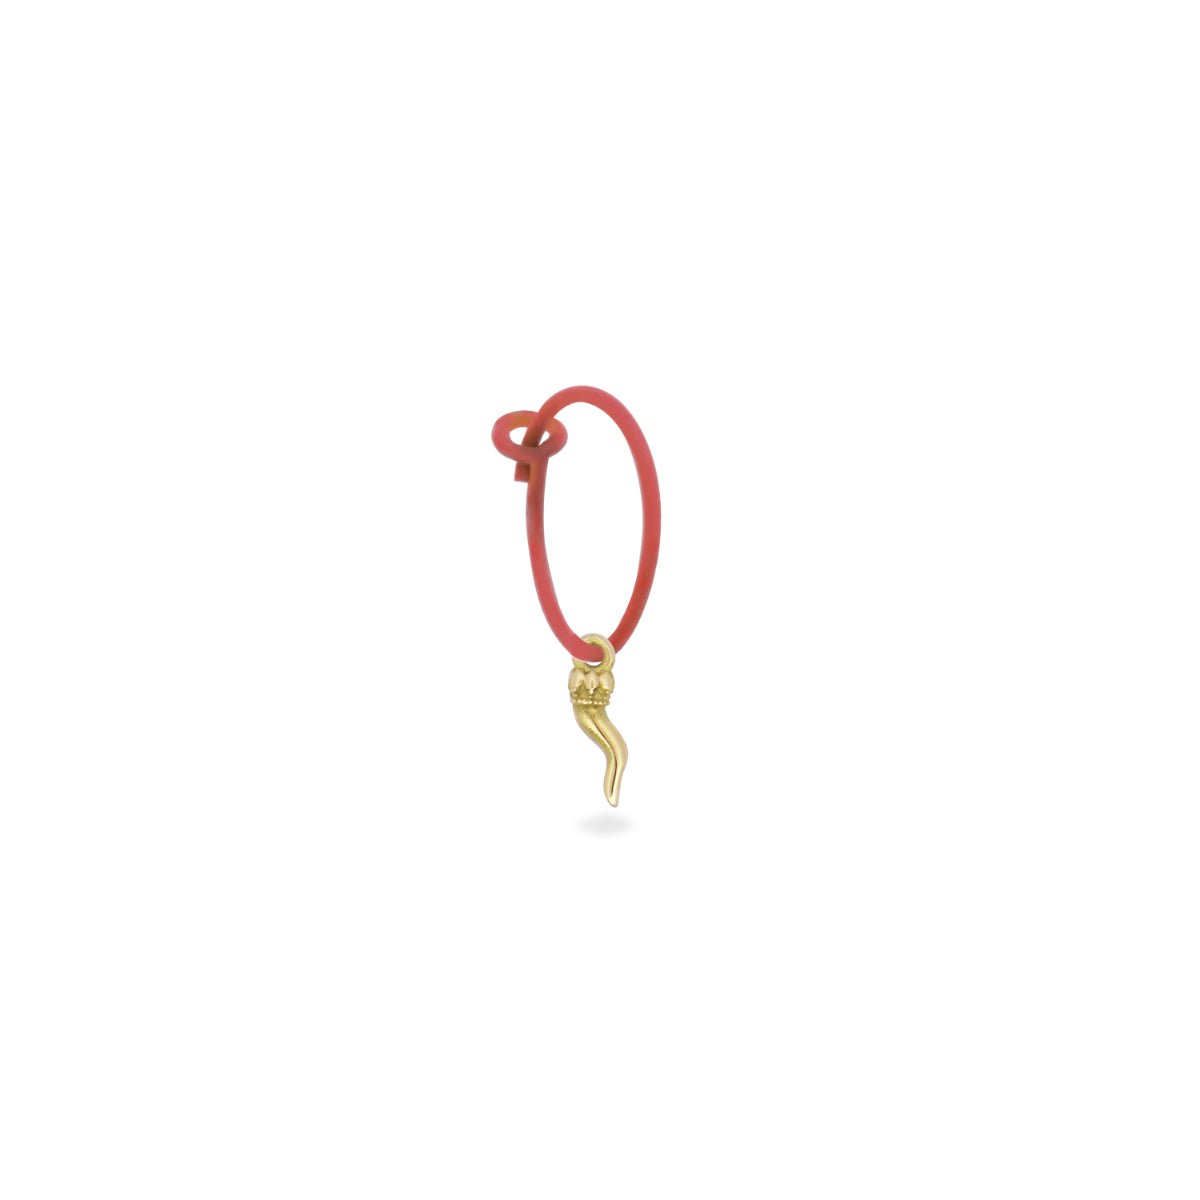 Single earring with Lucky horn and painted hoop - ORO18KT